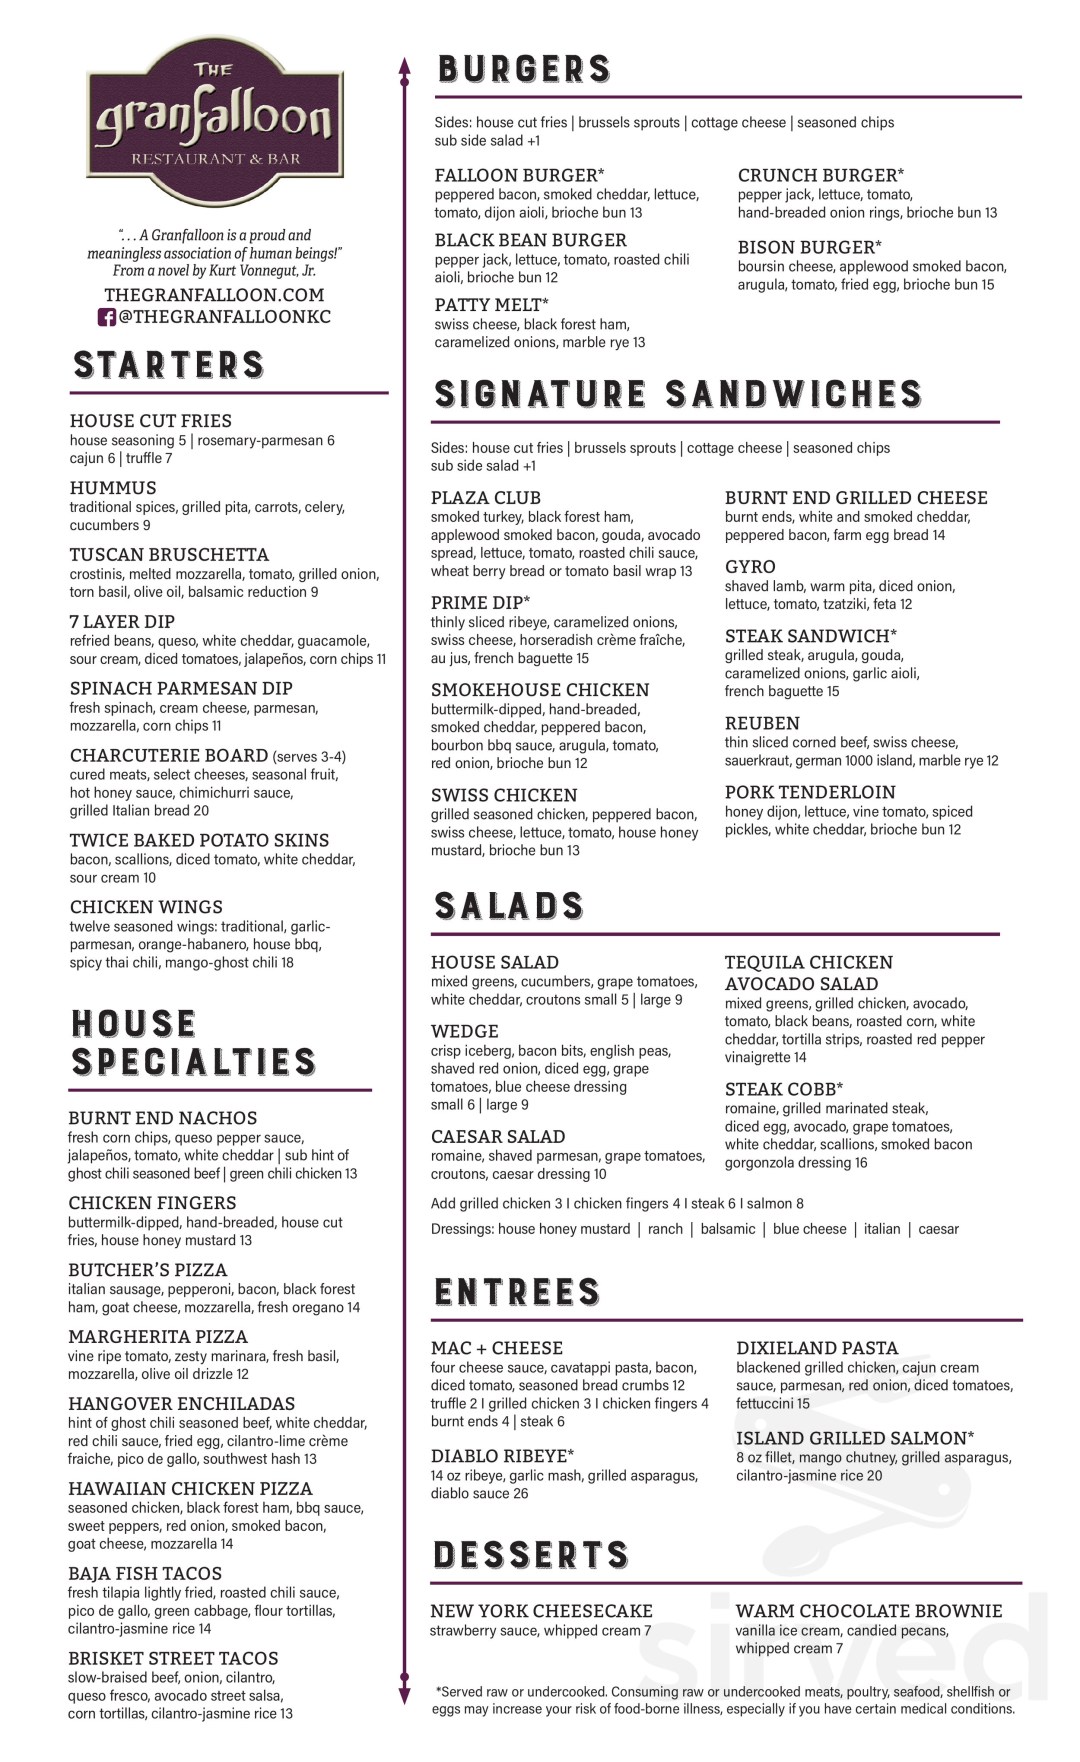 Picture of: The Granfalloon Restaurant And Bar menu in Kansas City, Missouri, USA